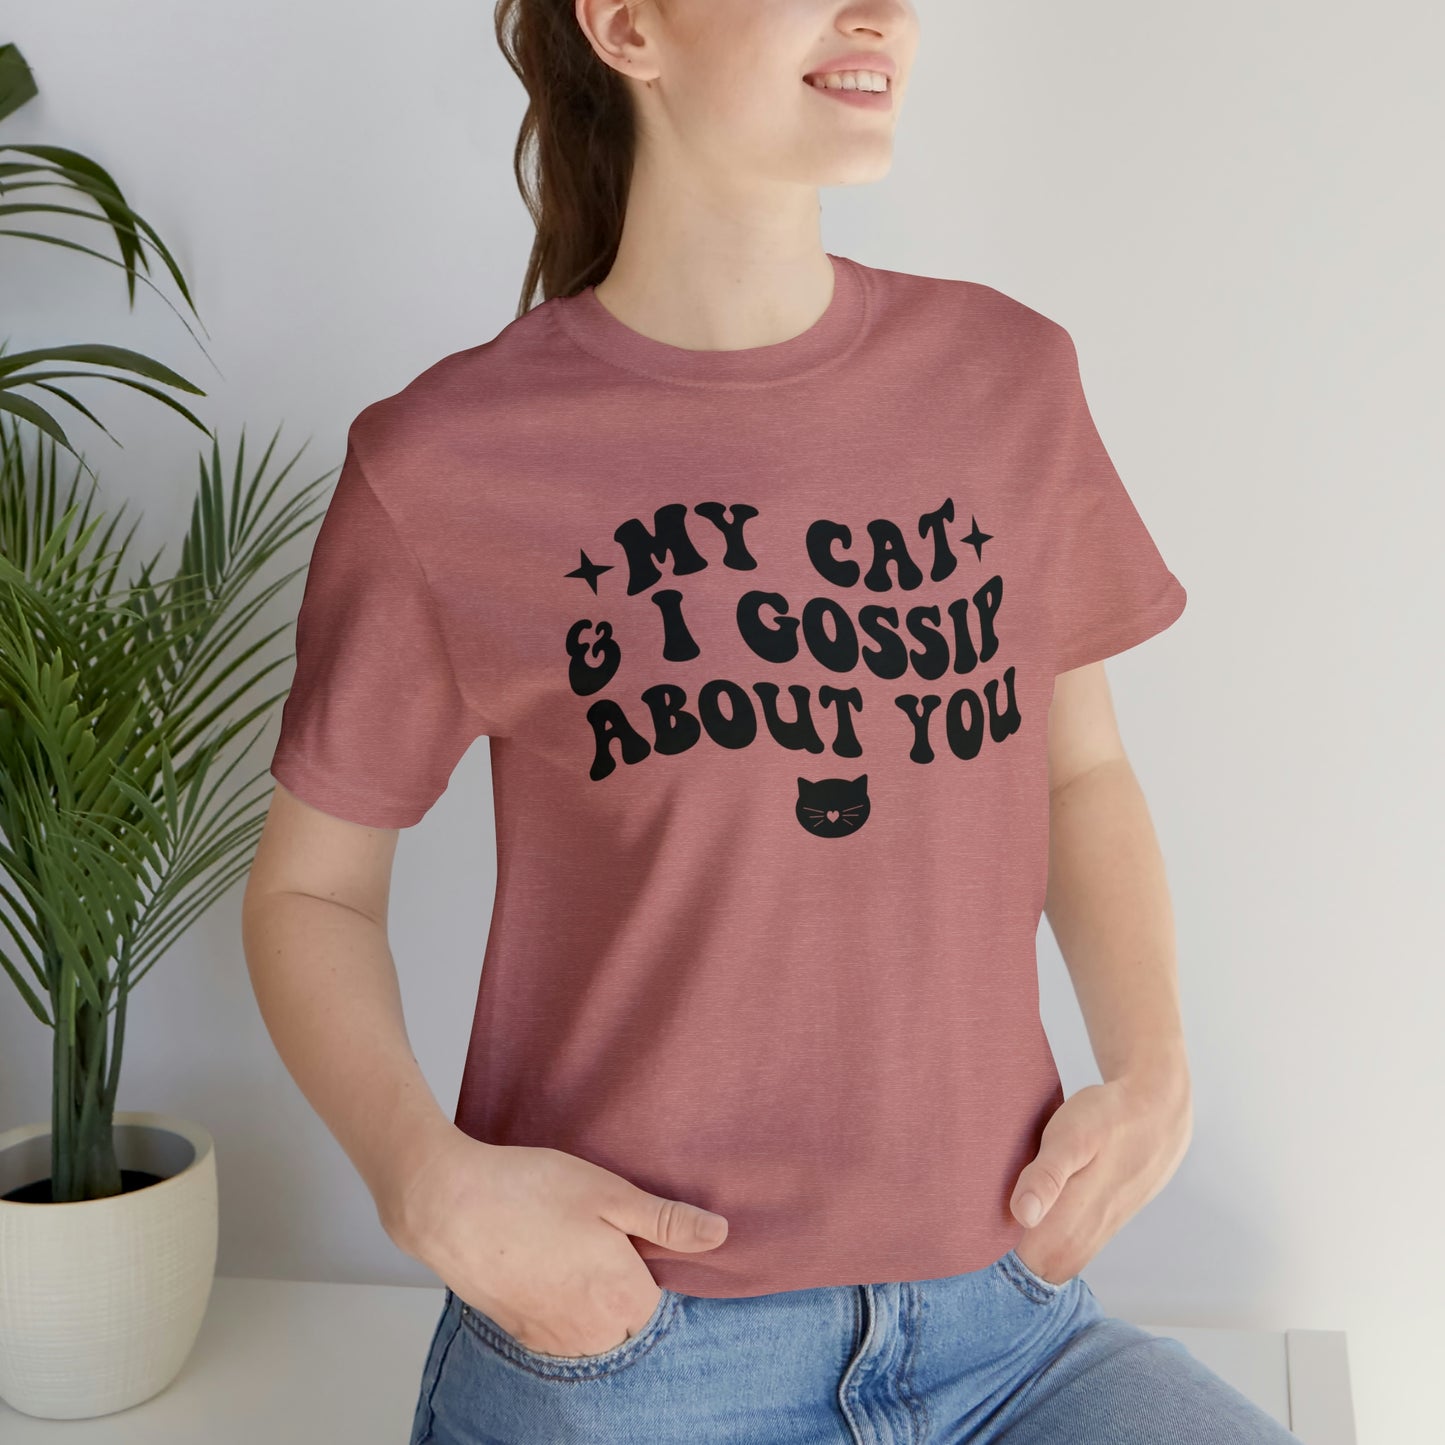 My Cat and I Gossip About You Short Sleeve T-shirt